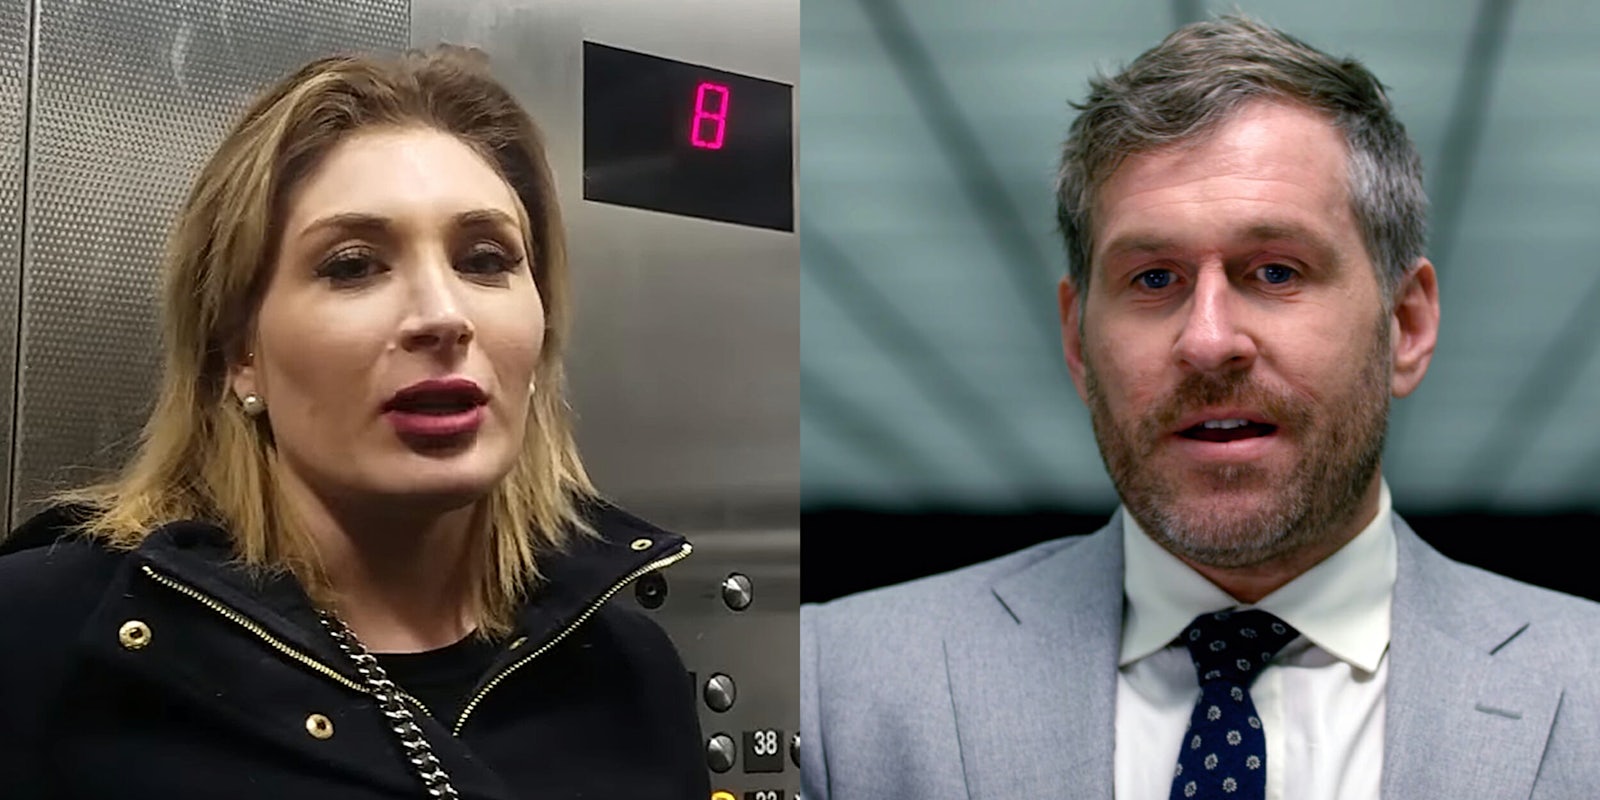 Laura Loomer and Mike Cernovich